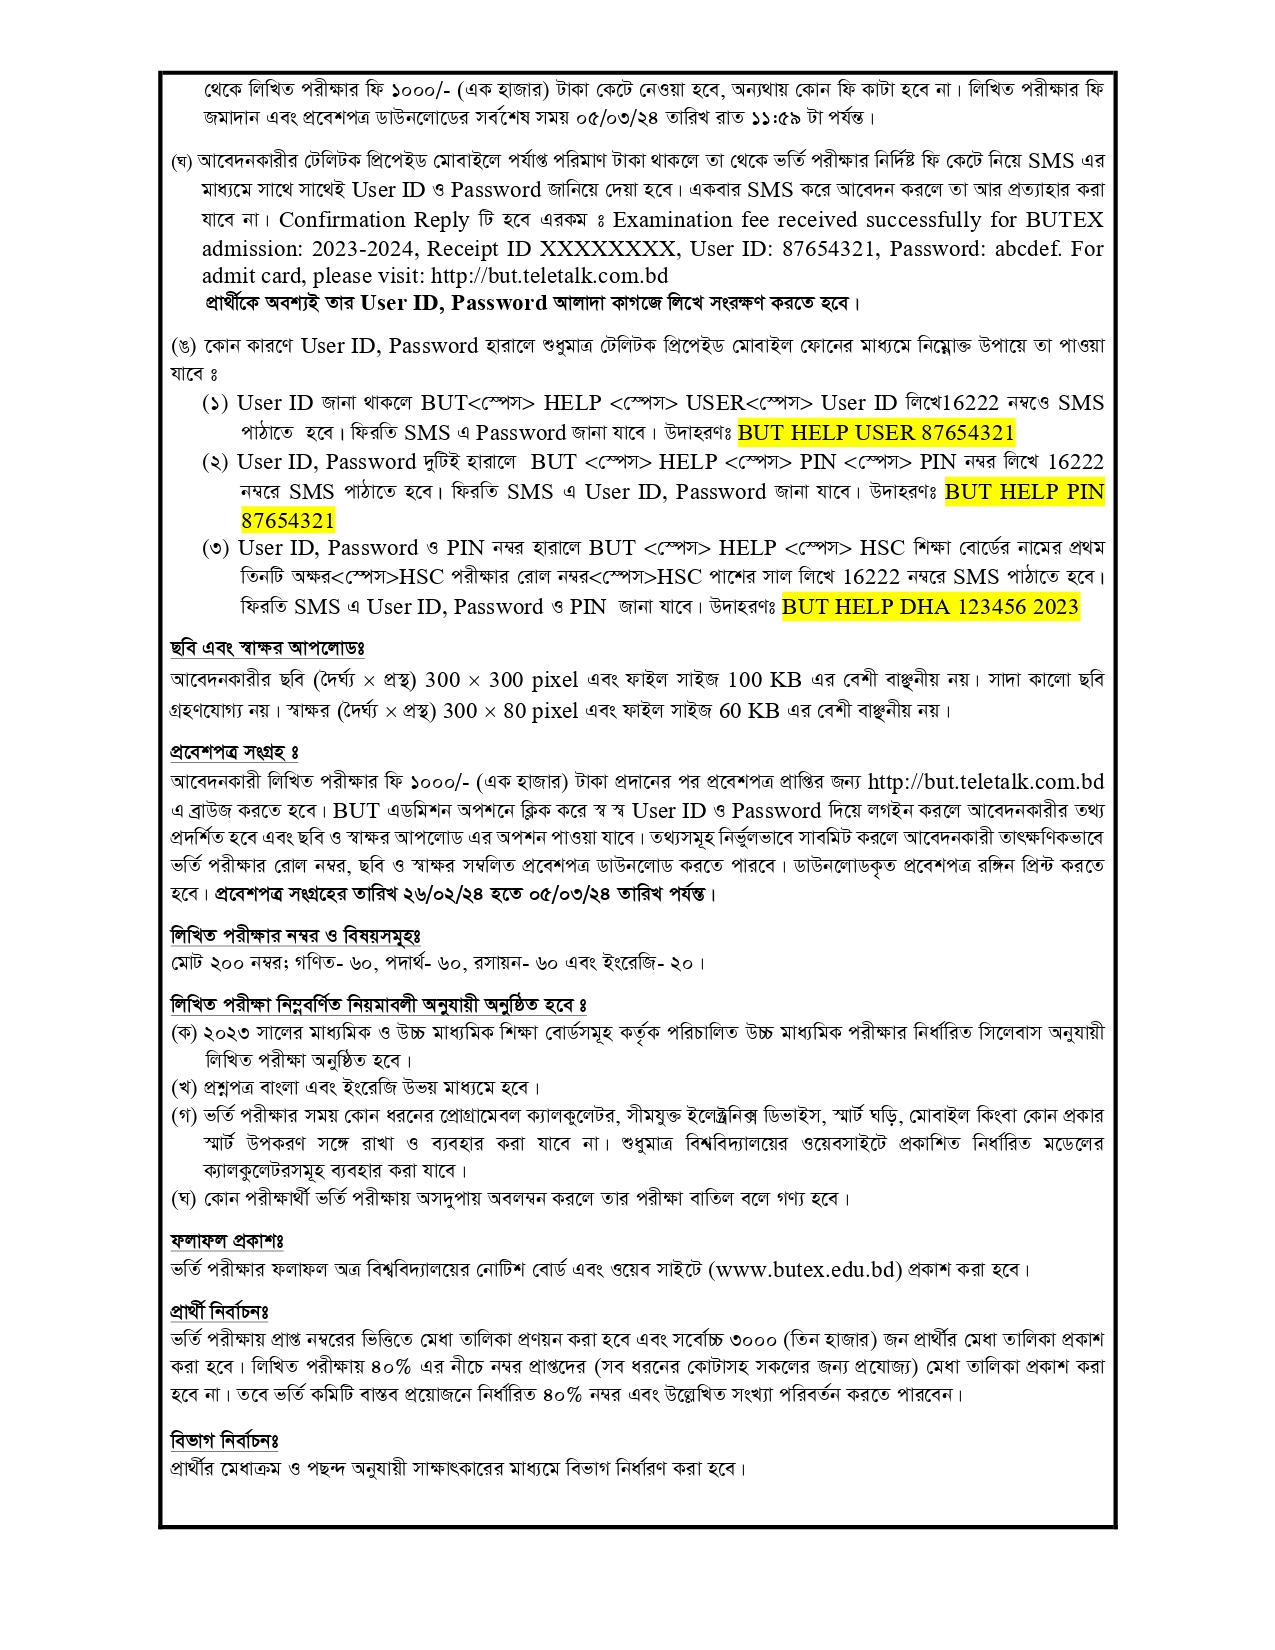 BSc admission circular 2023 2024 page 0003